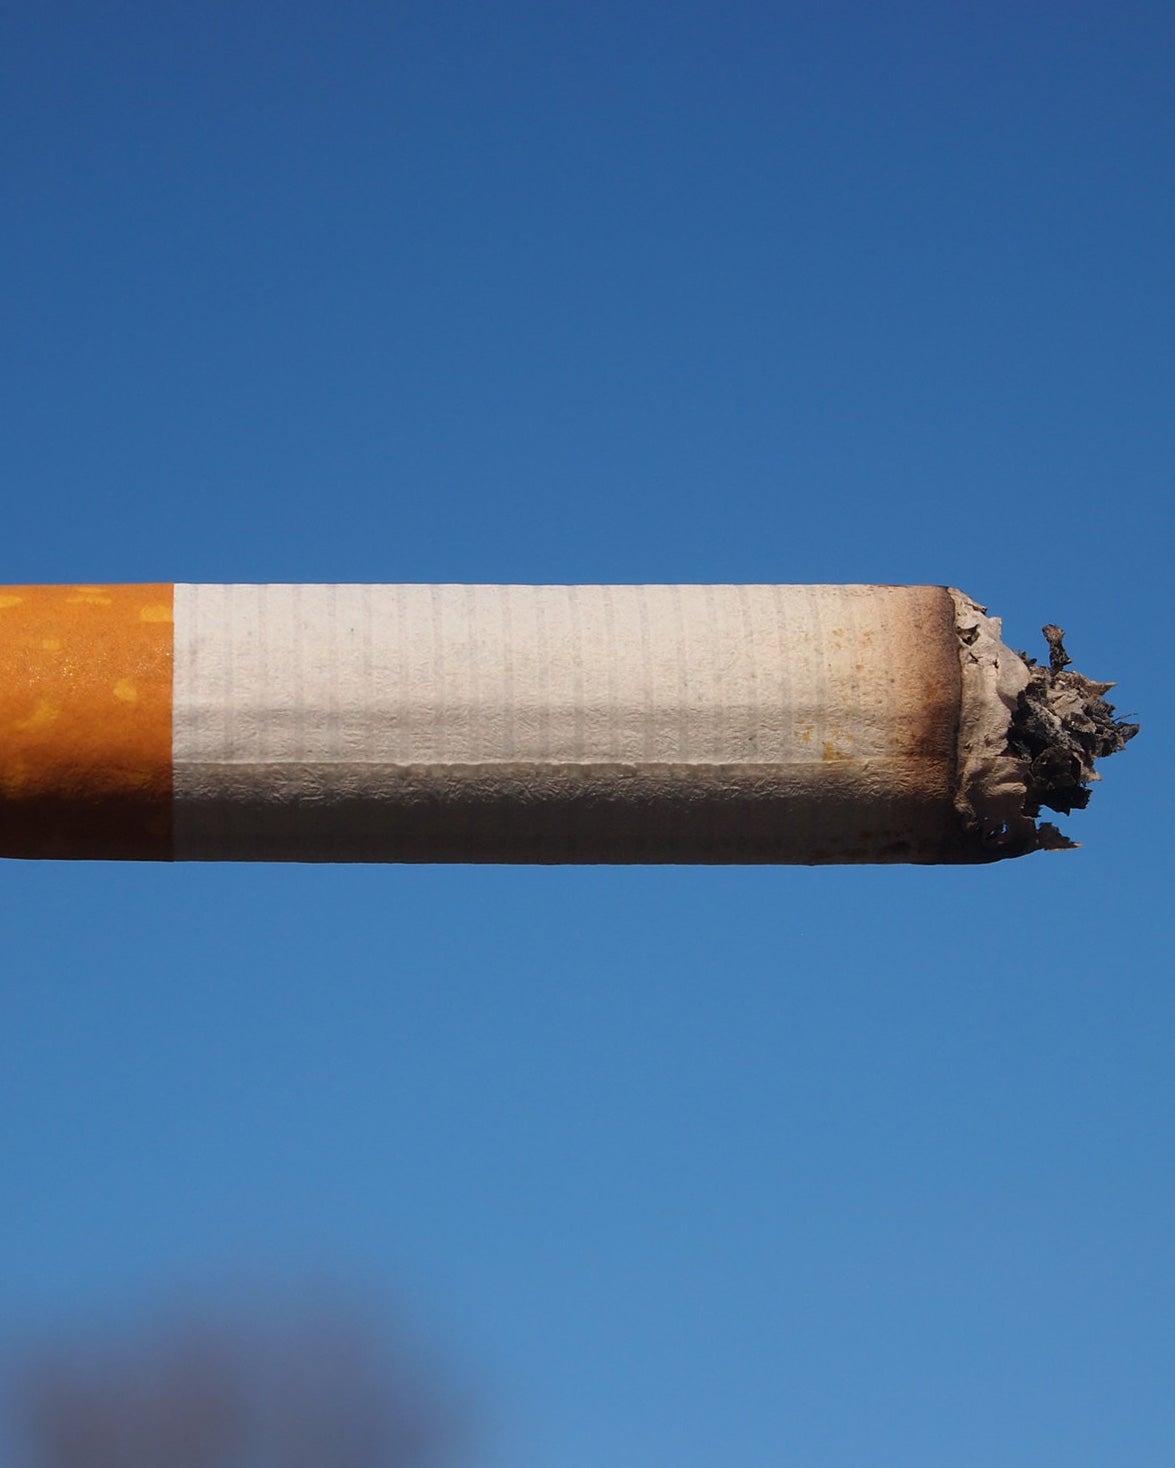 A partially used cigarette against a blue sky.